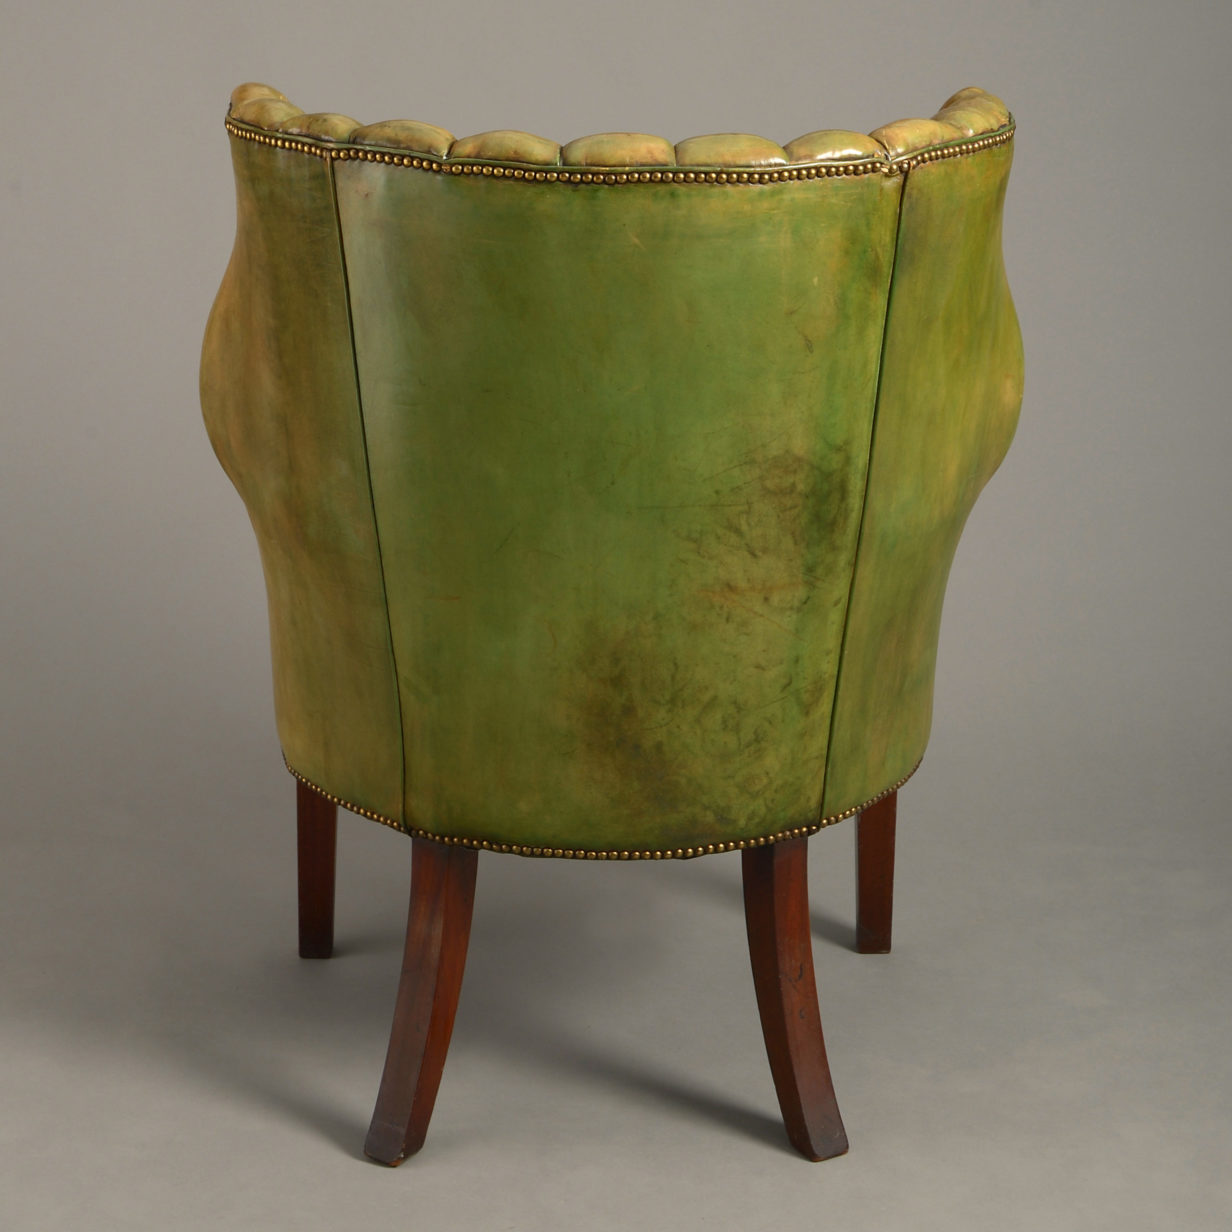 A 19th century george iii style leather upholstered armchair